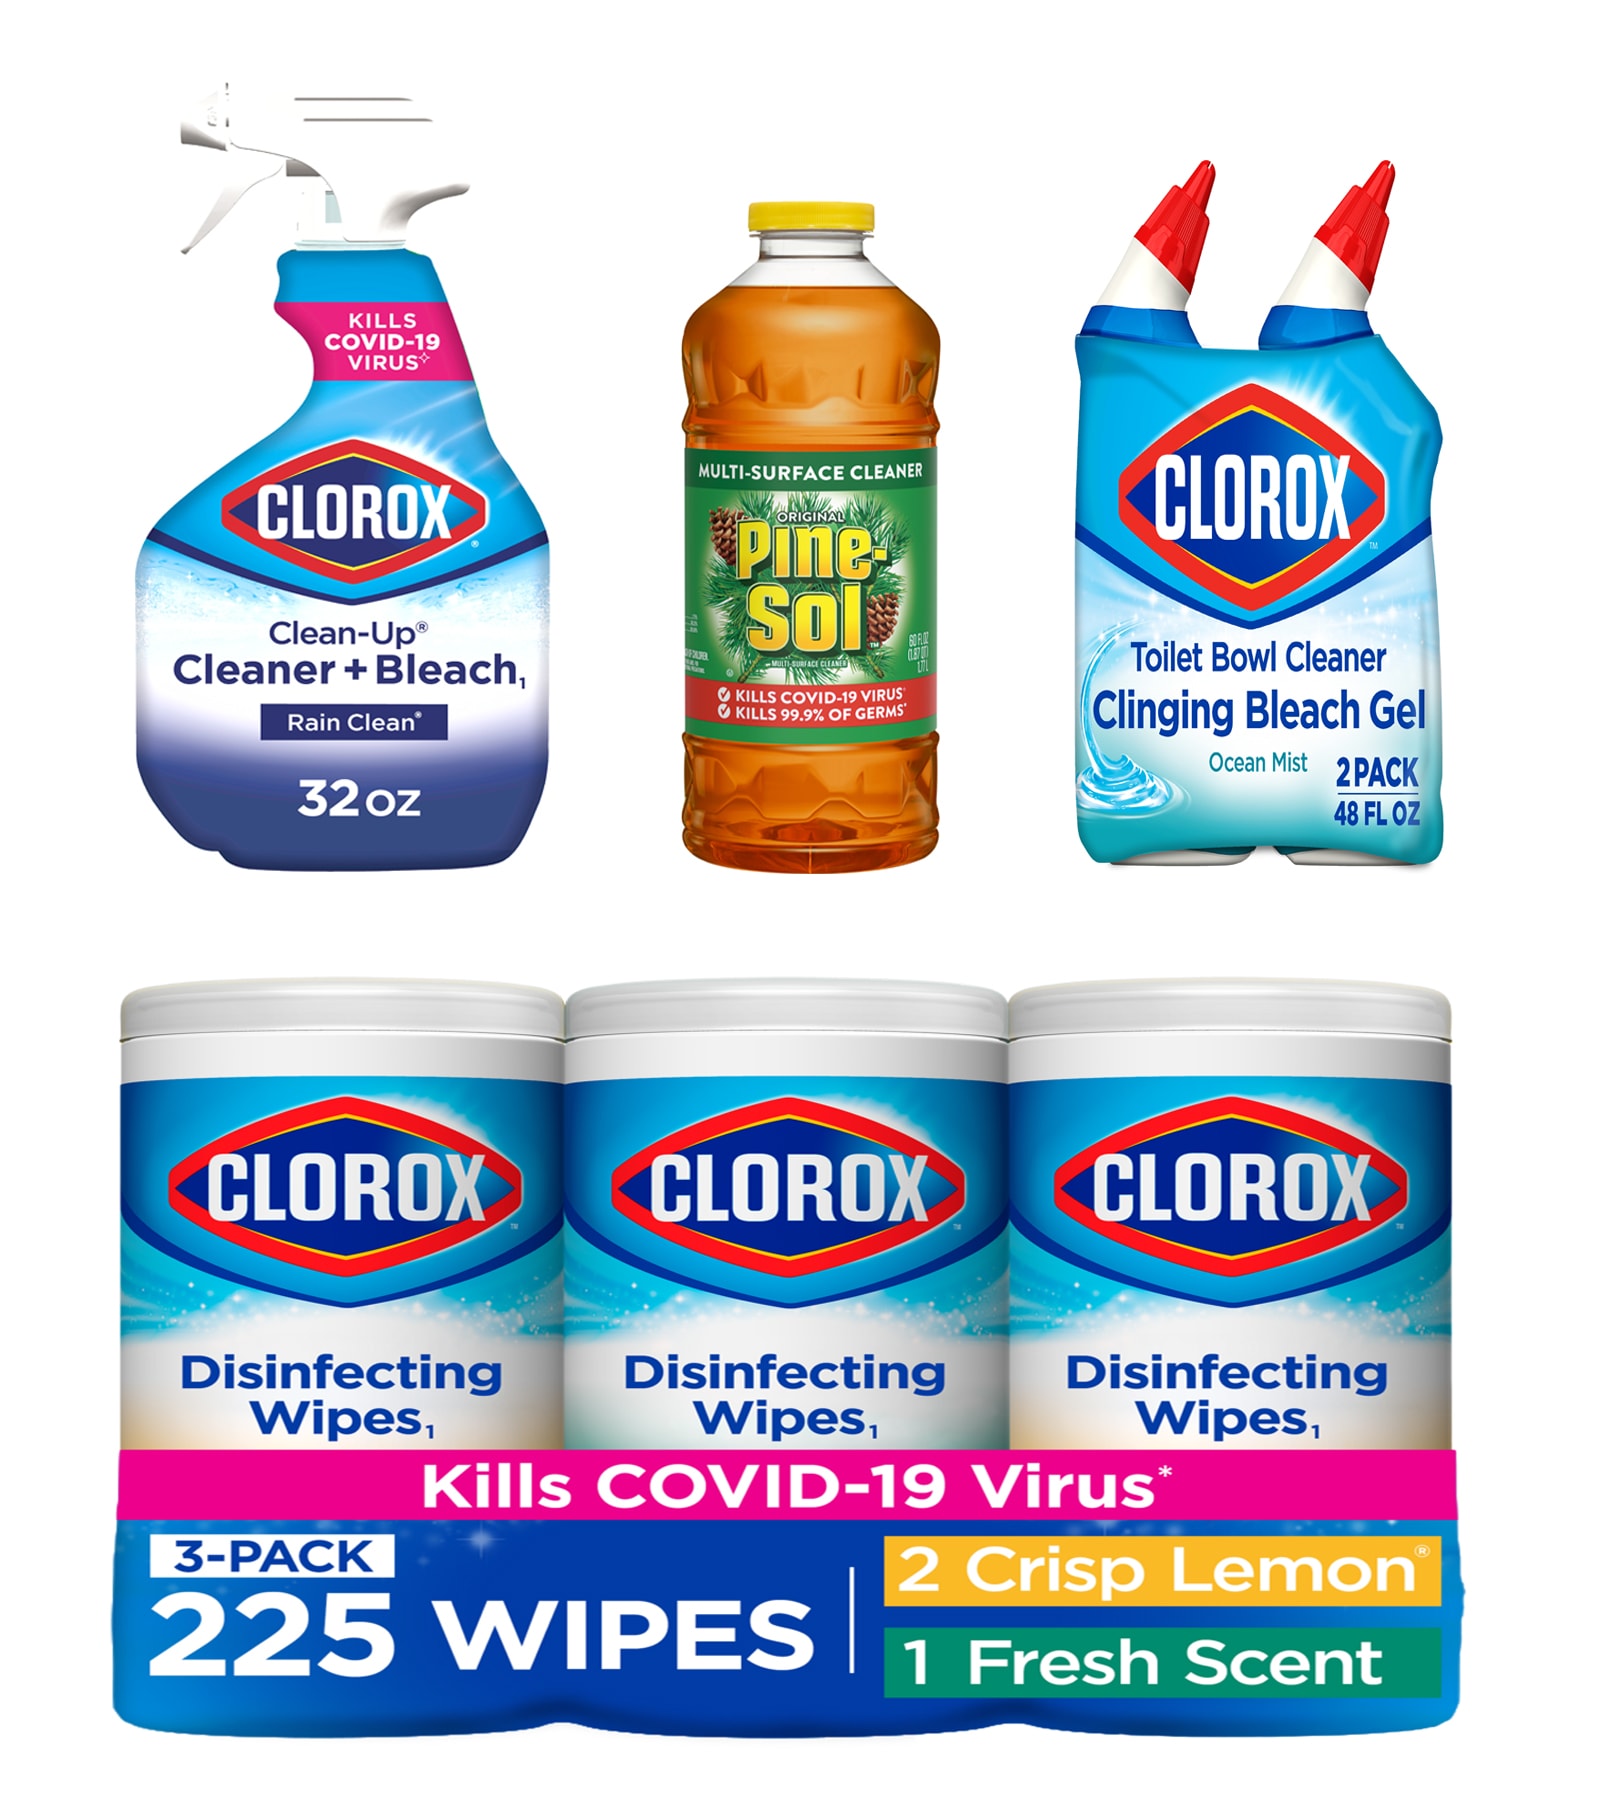 Low-cost cleaning products retailer